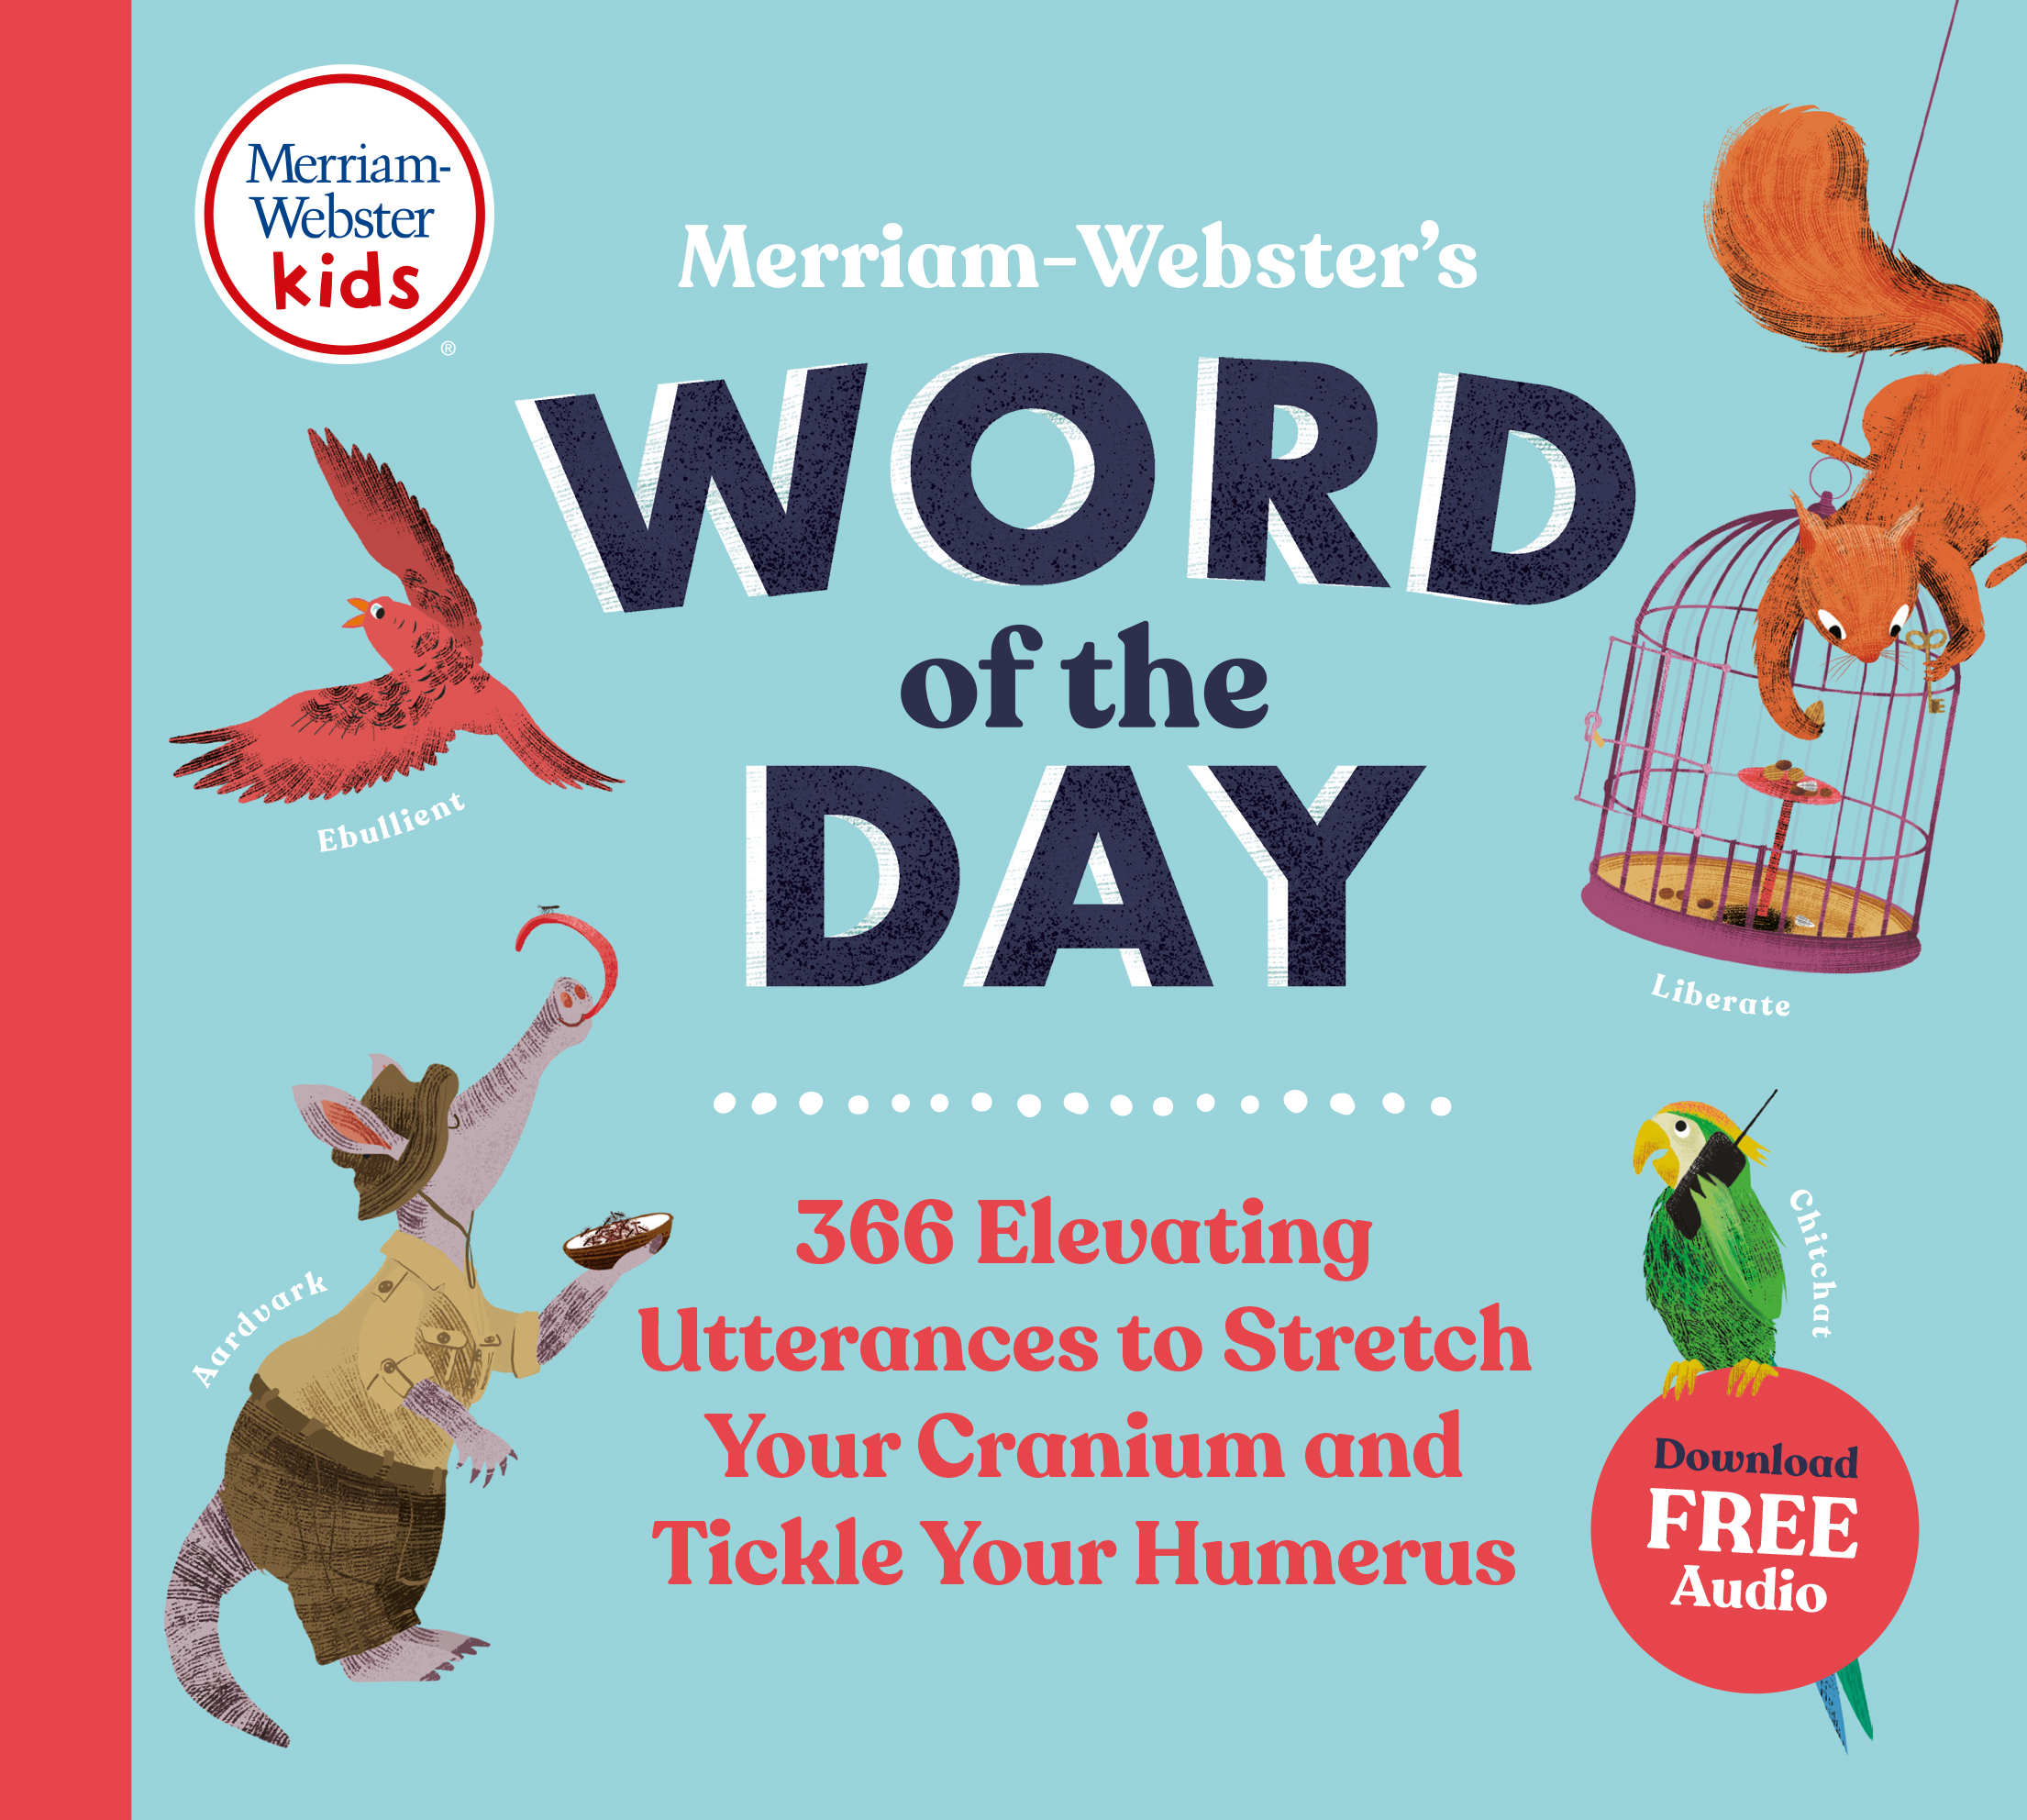 Merriam-Webster’s Word of the Day: 366 Elevating Utterances to Stretch Your Cranium and Tickle Your Humerus